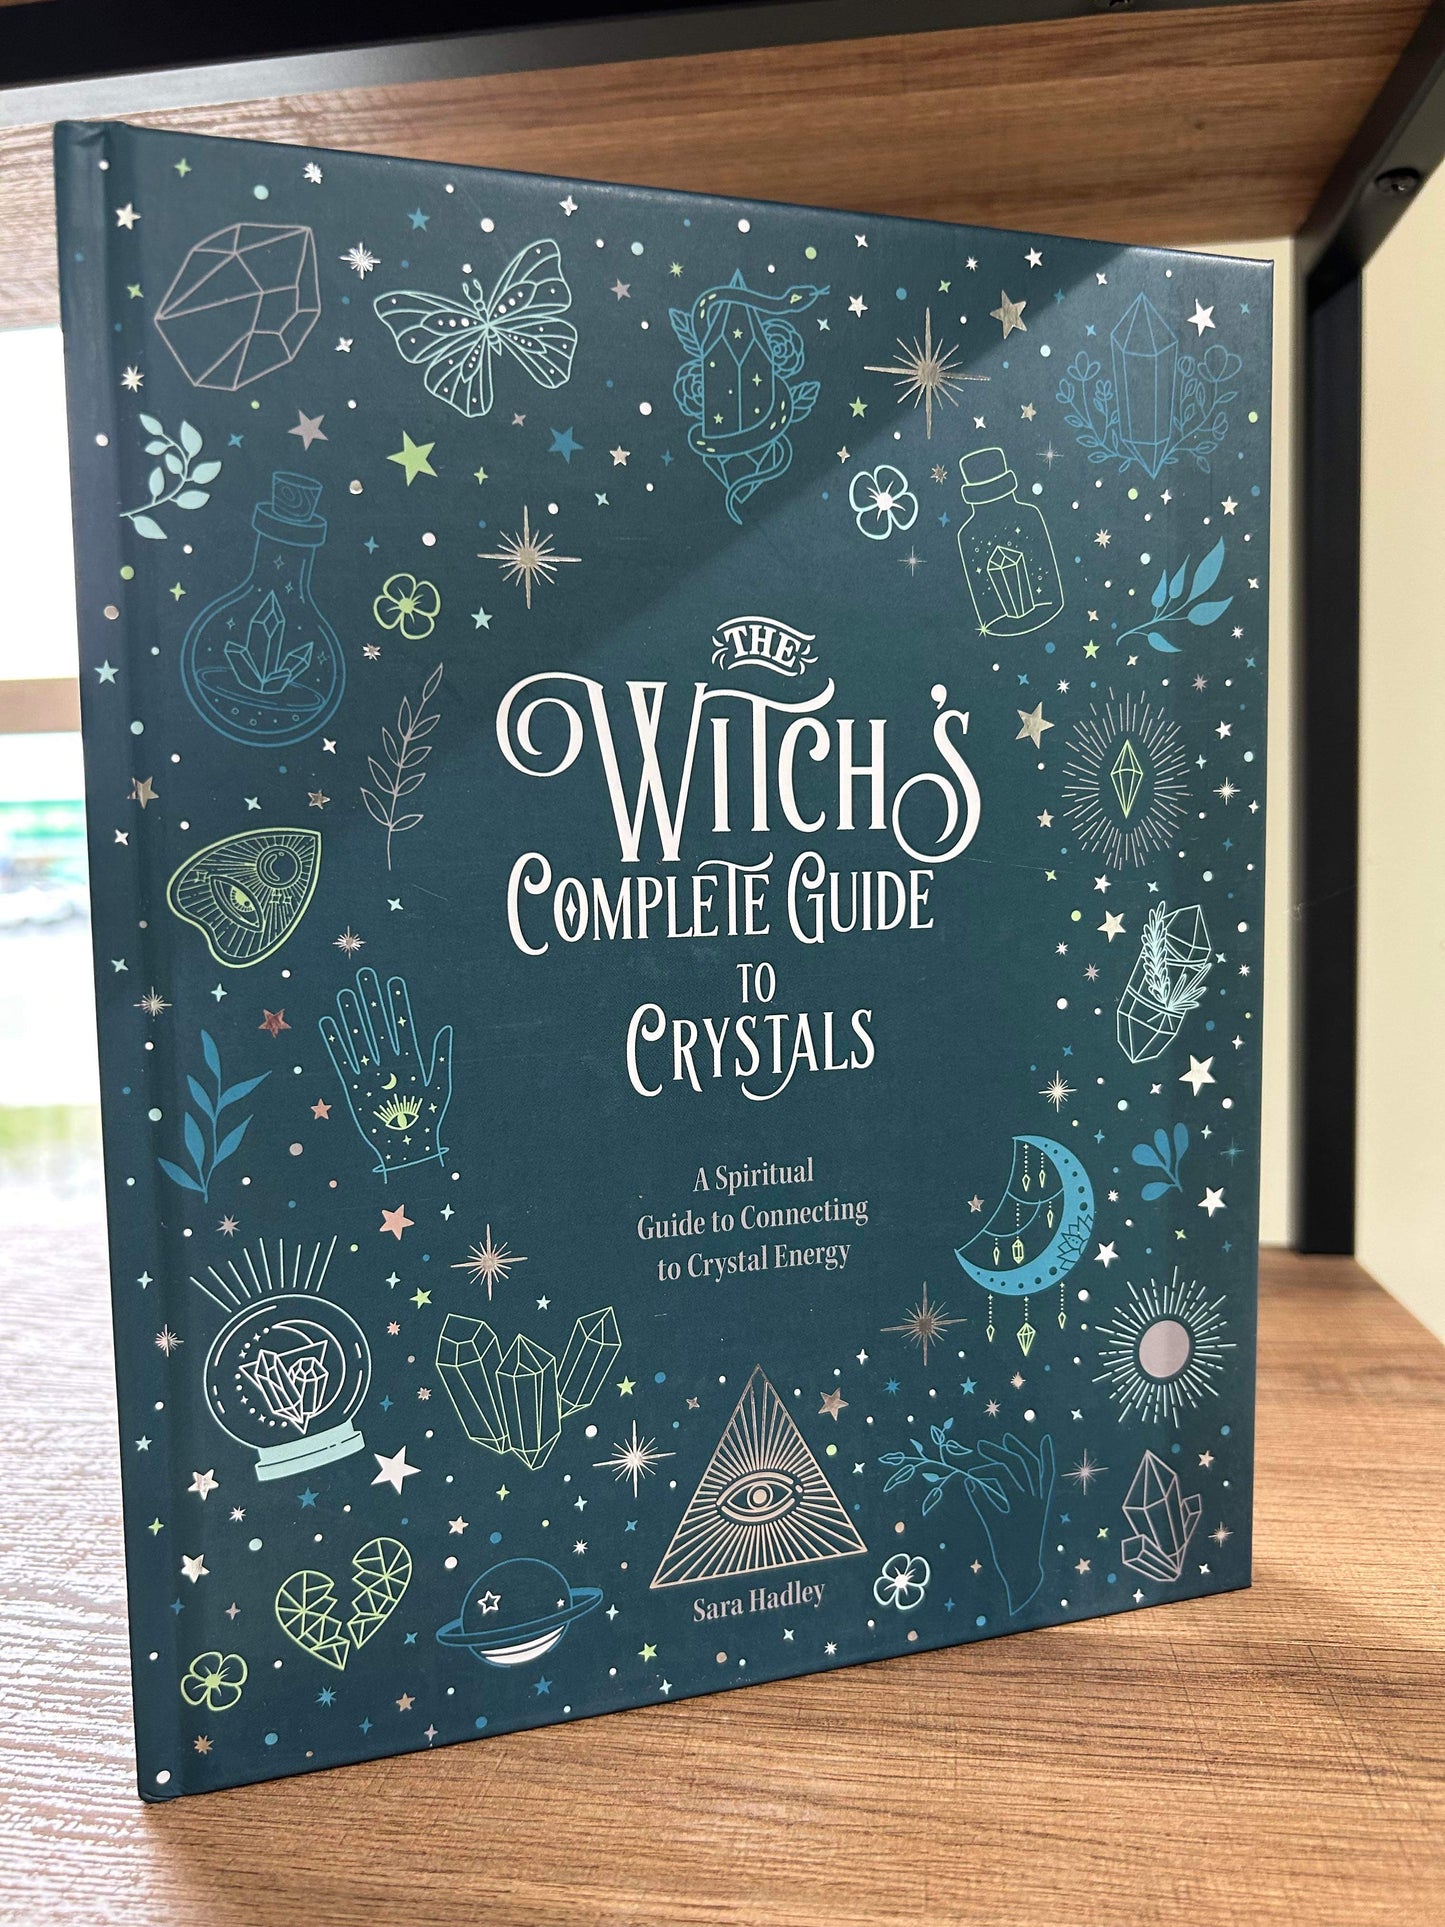 The Witch's Complete Guide to Crystals by Sara Hadley